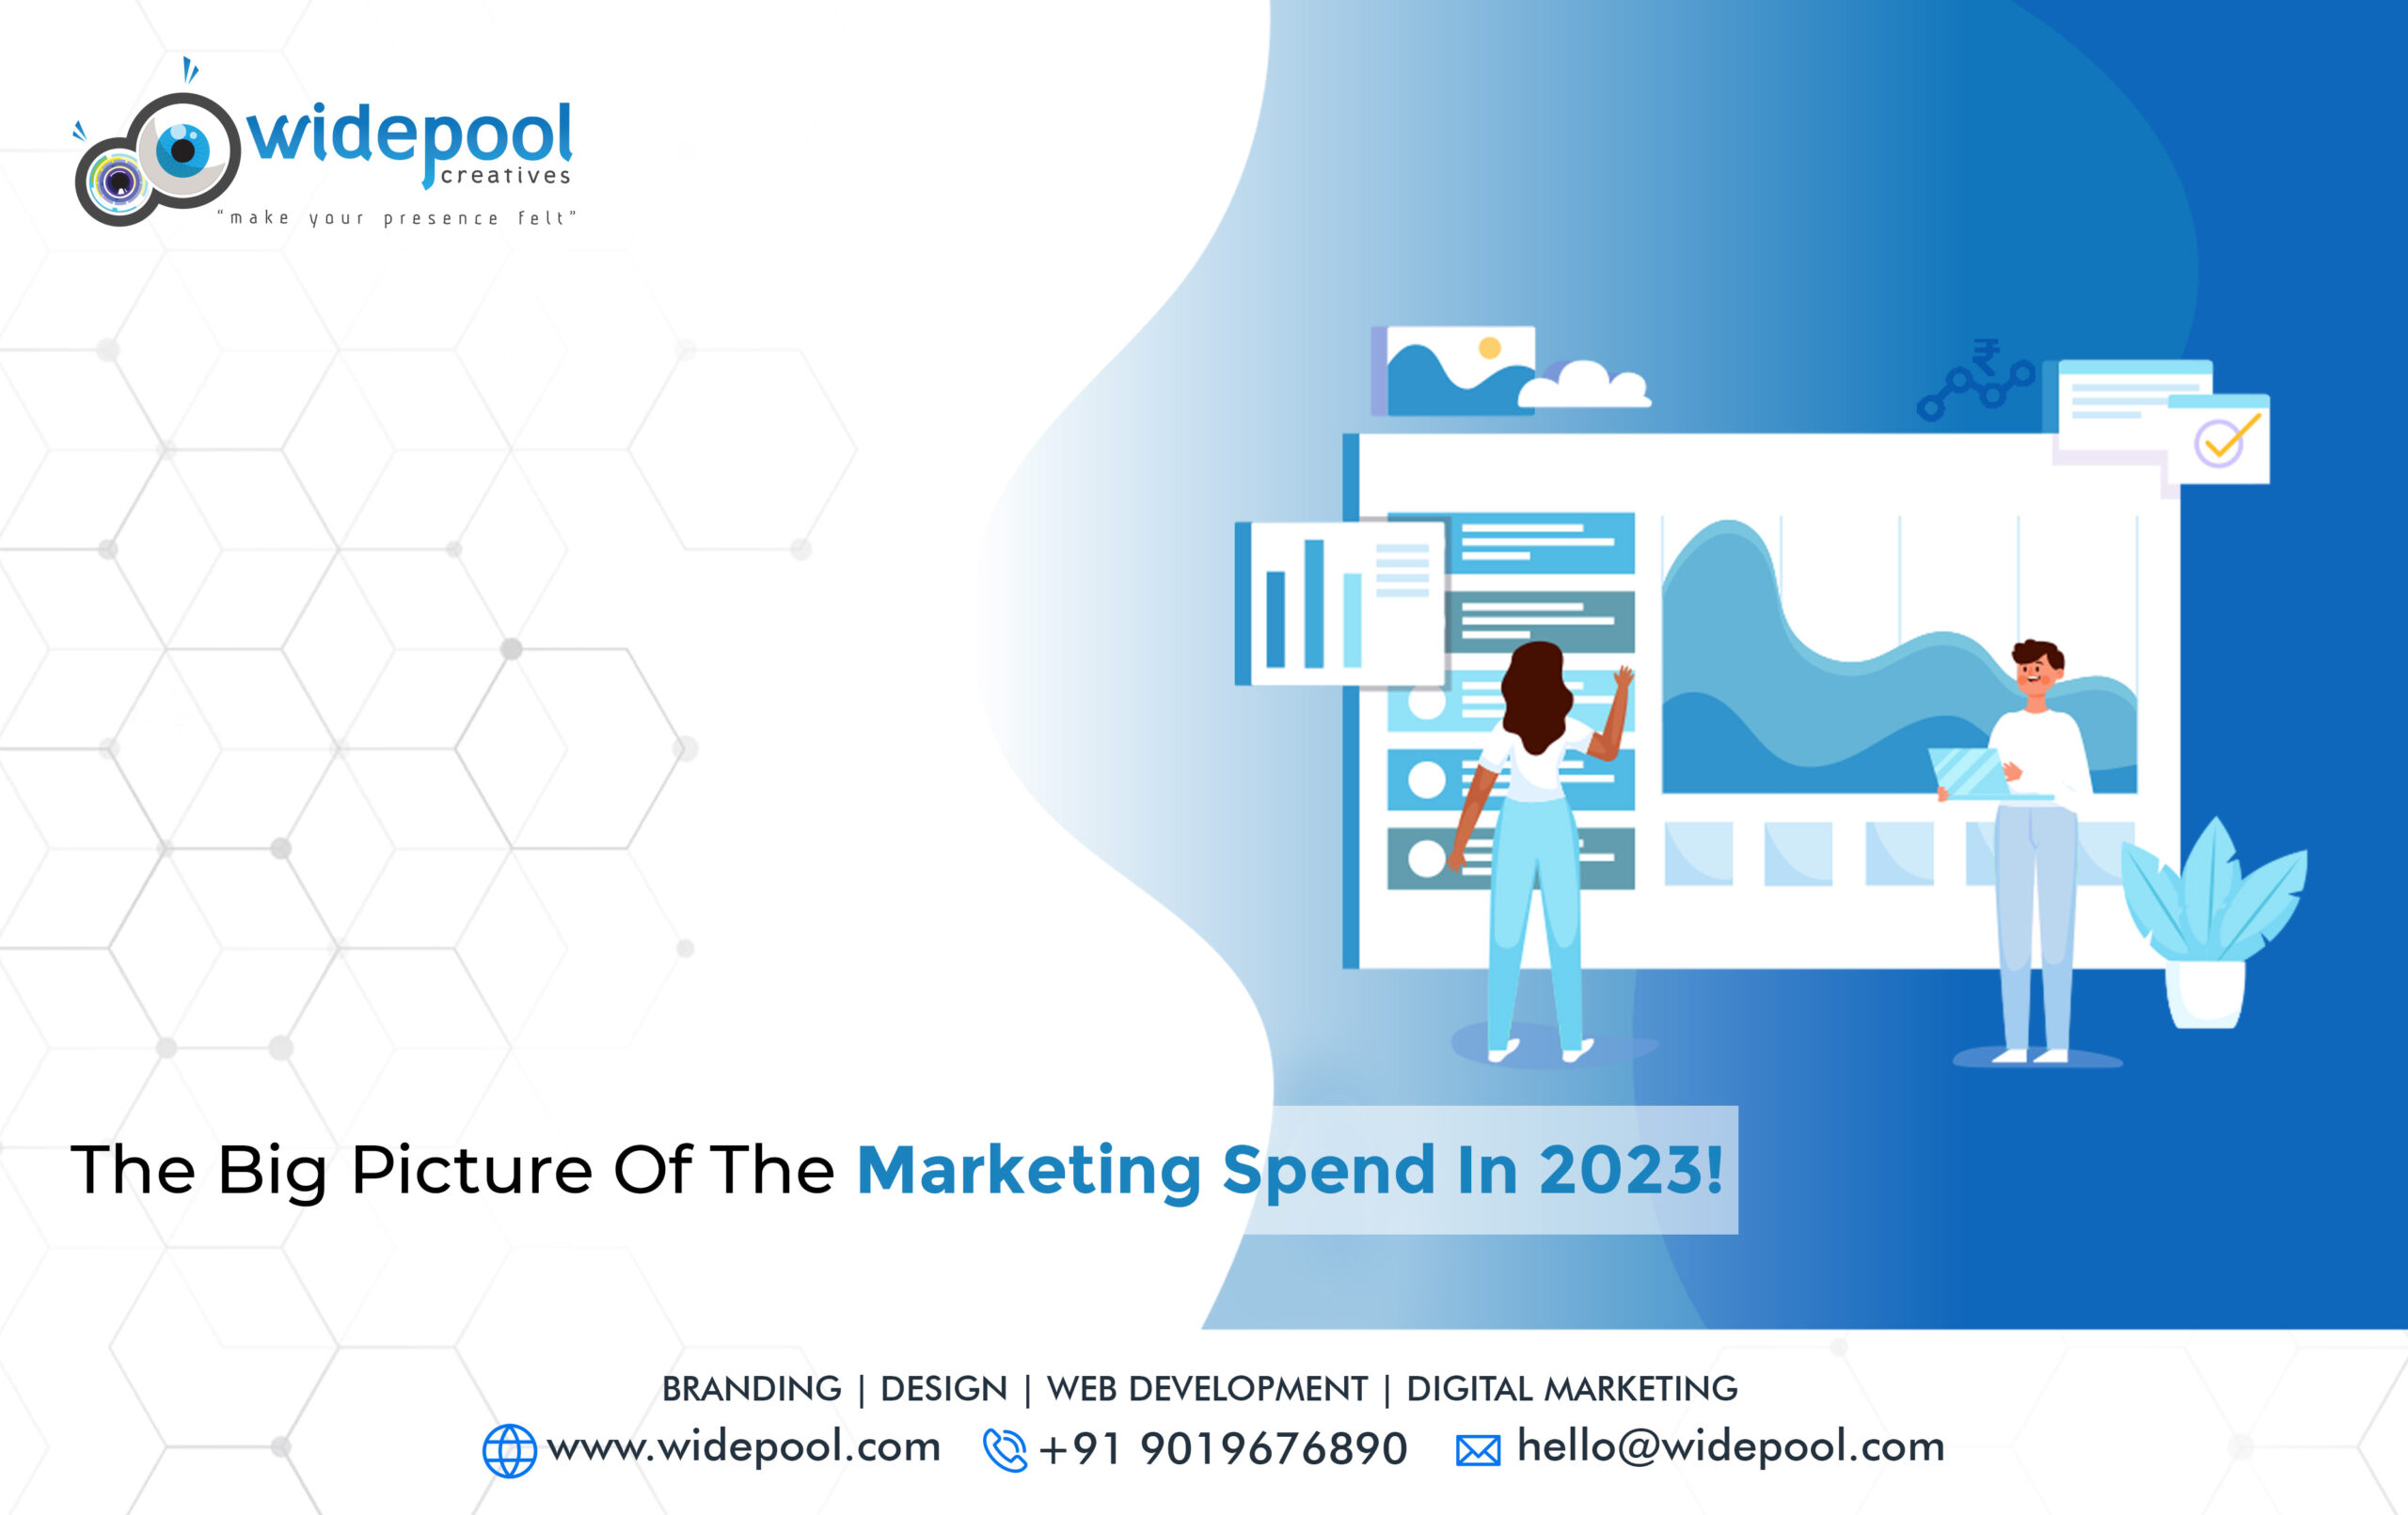 The Big Picture of the Marketing Spend in 2023!